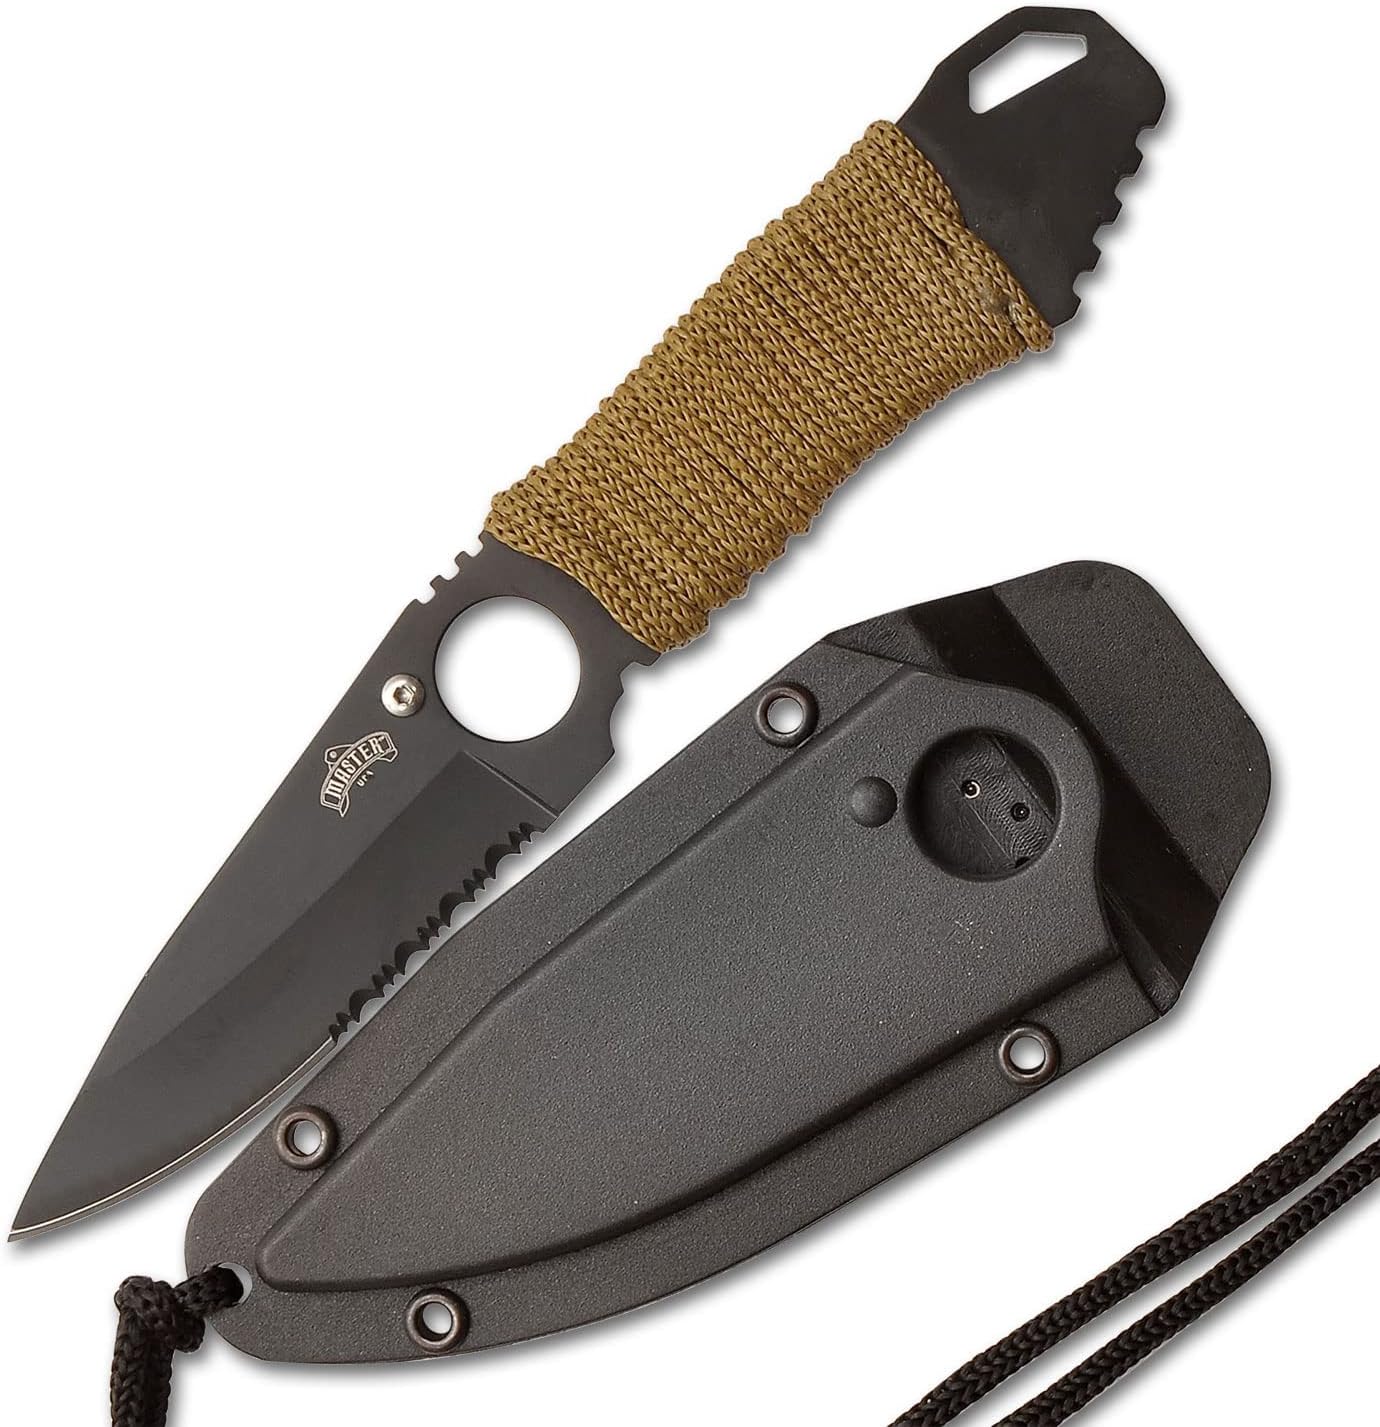 Full Tang Tactical Blade Neck Knife - Green Cord Wrapped Handle MU-1121GN